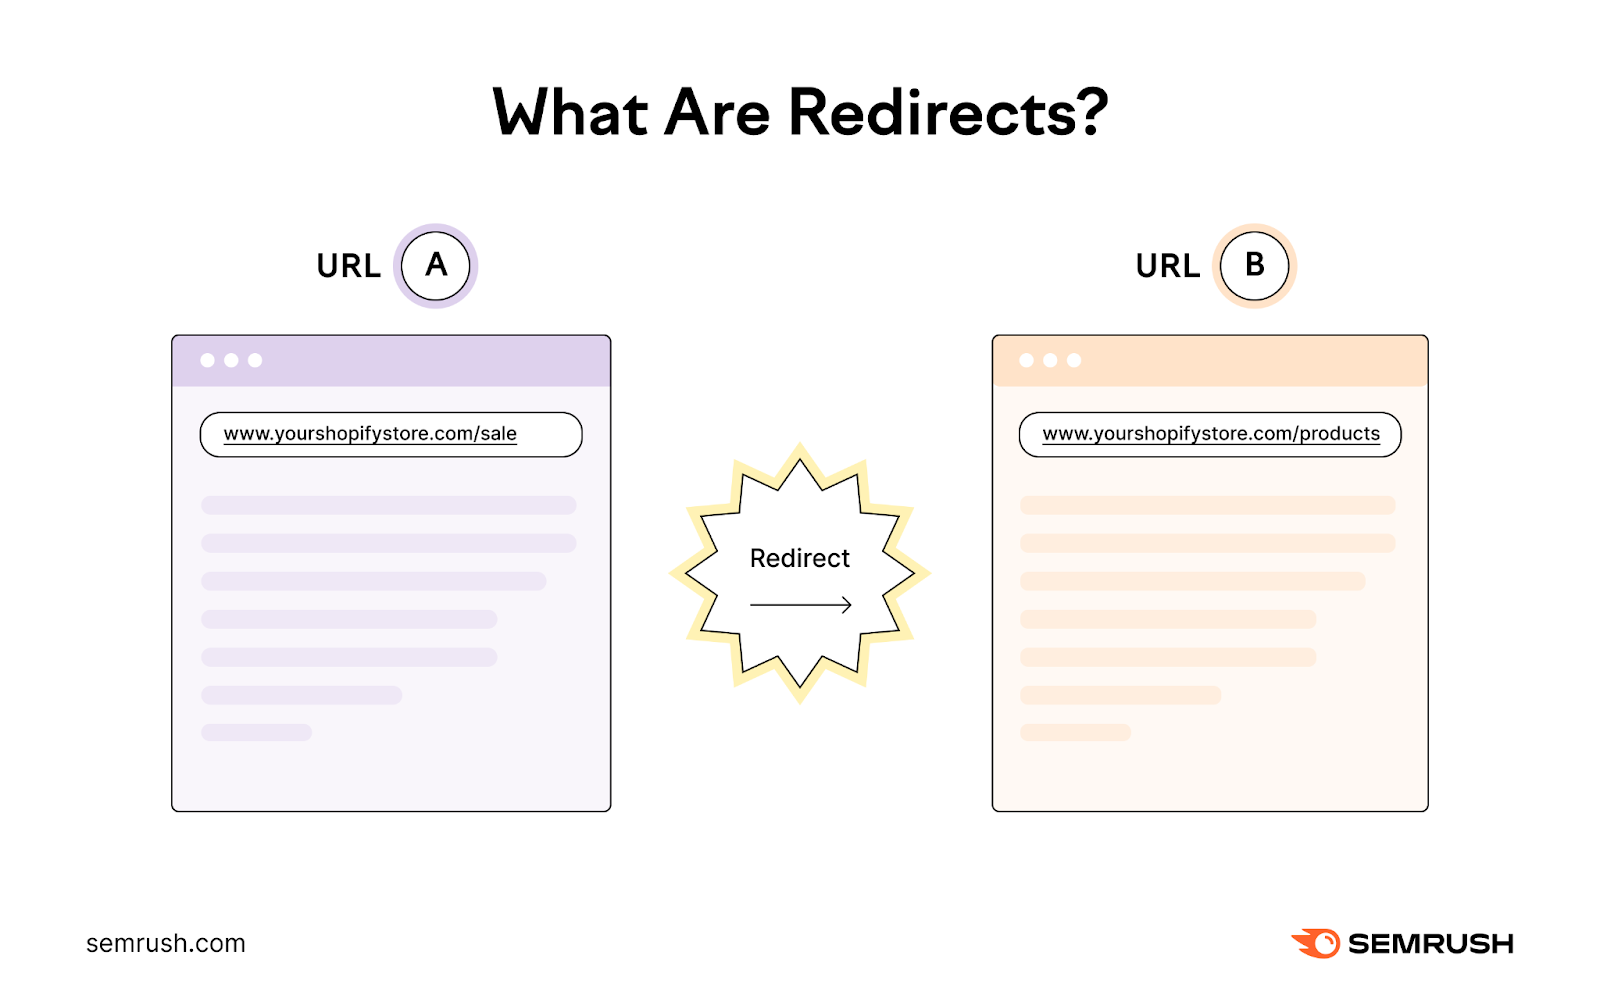 A redirect from URL A to URL B